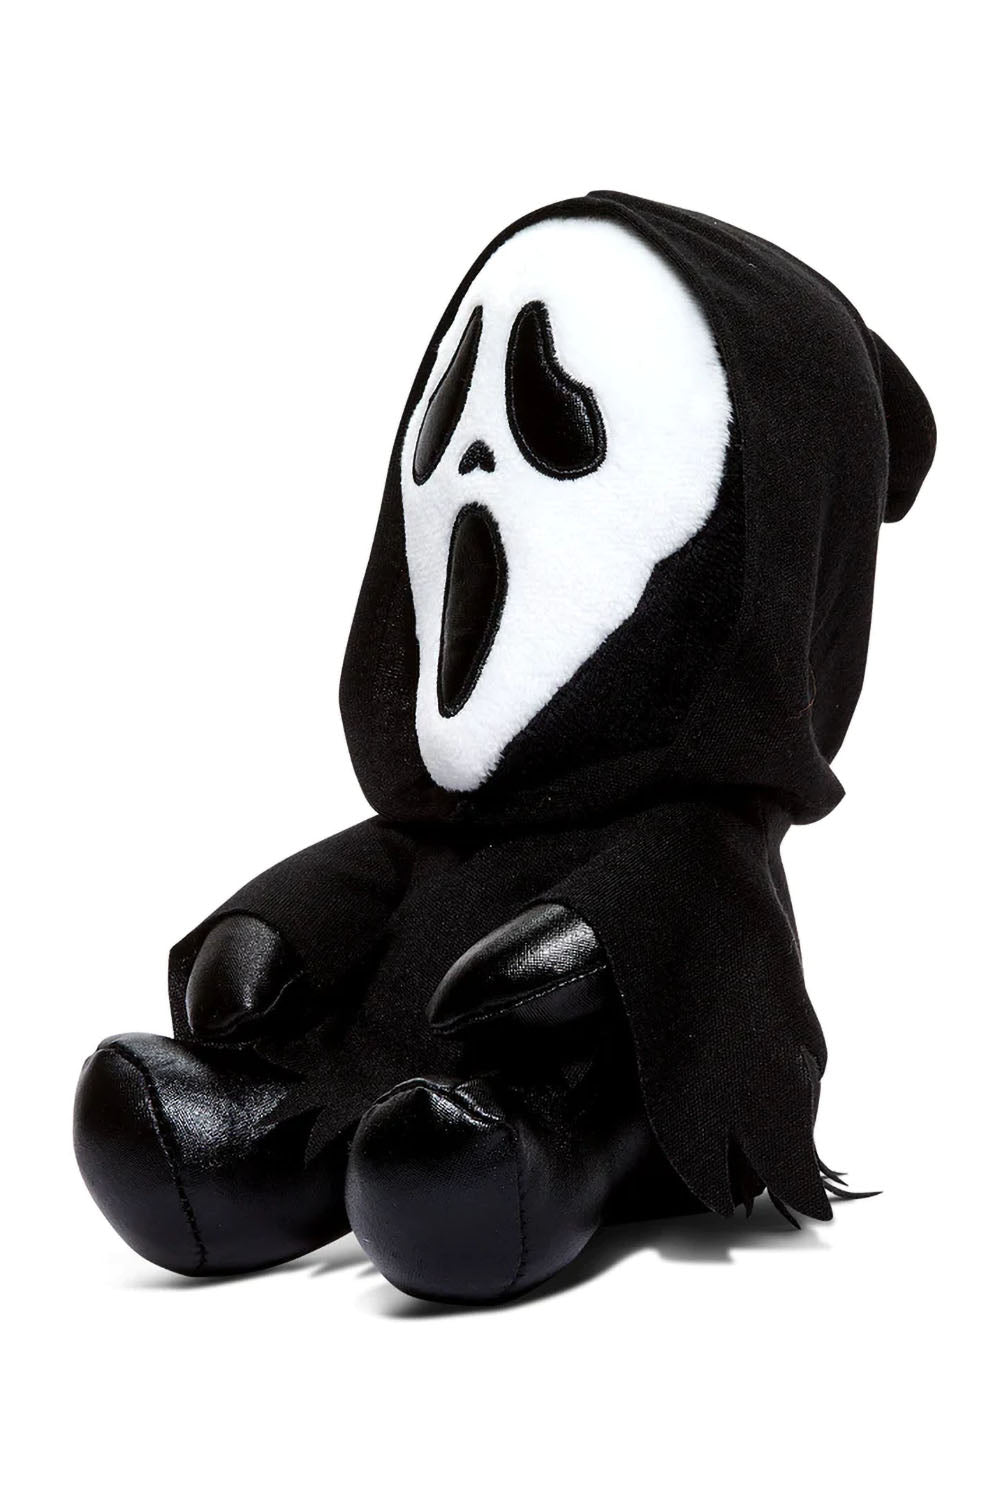 Baby Ghostface Phunny Plush Toy